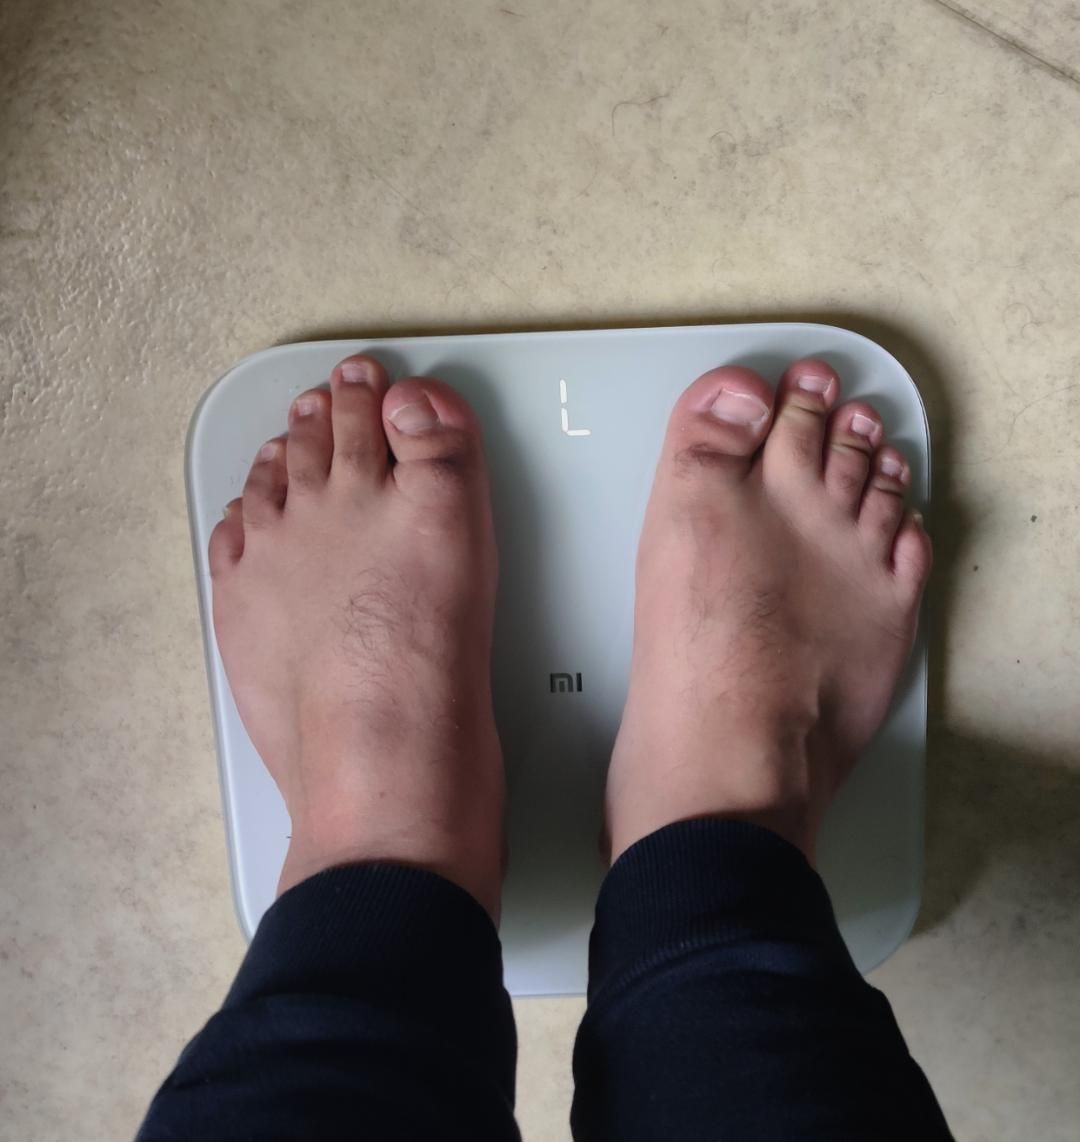 I think my scale is trying to tell me something.